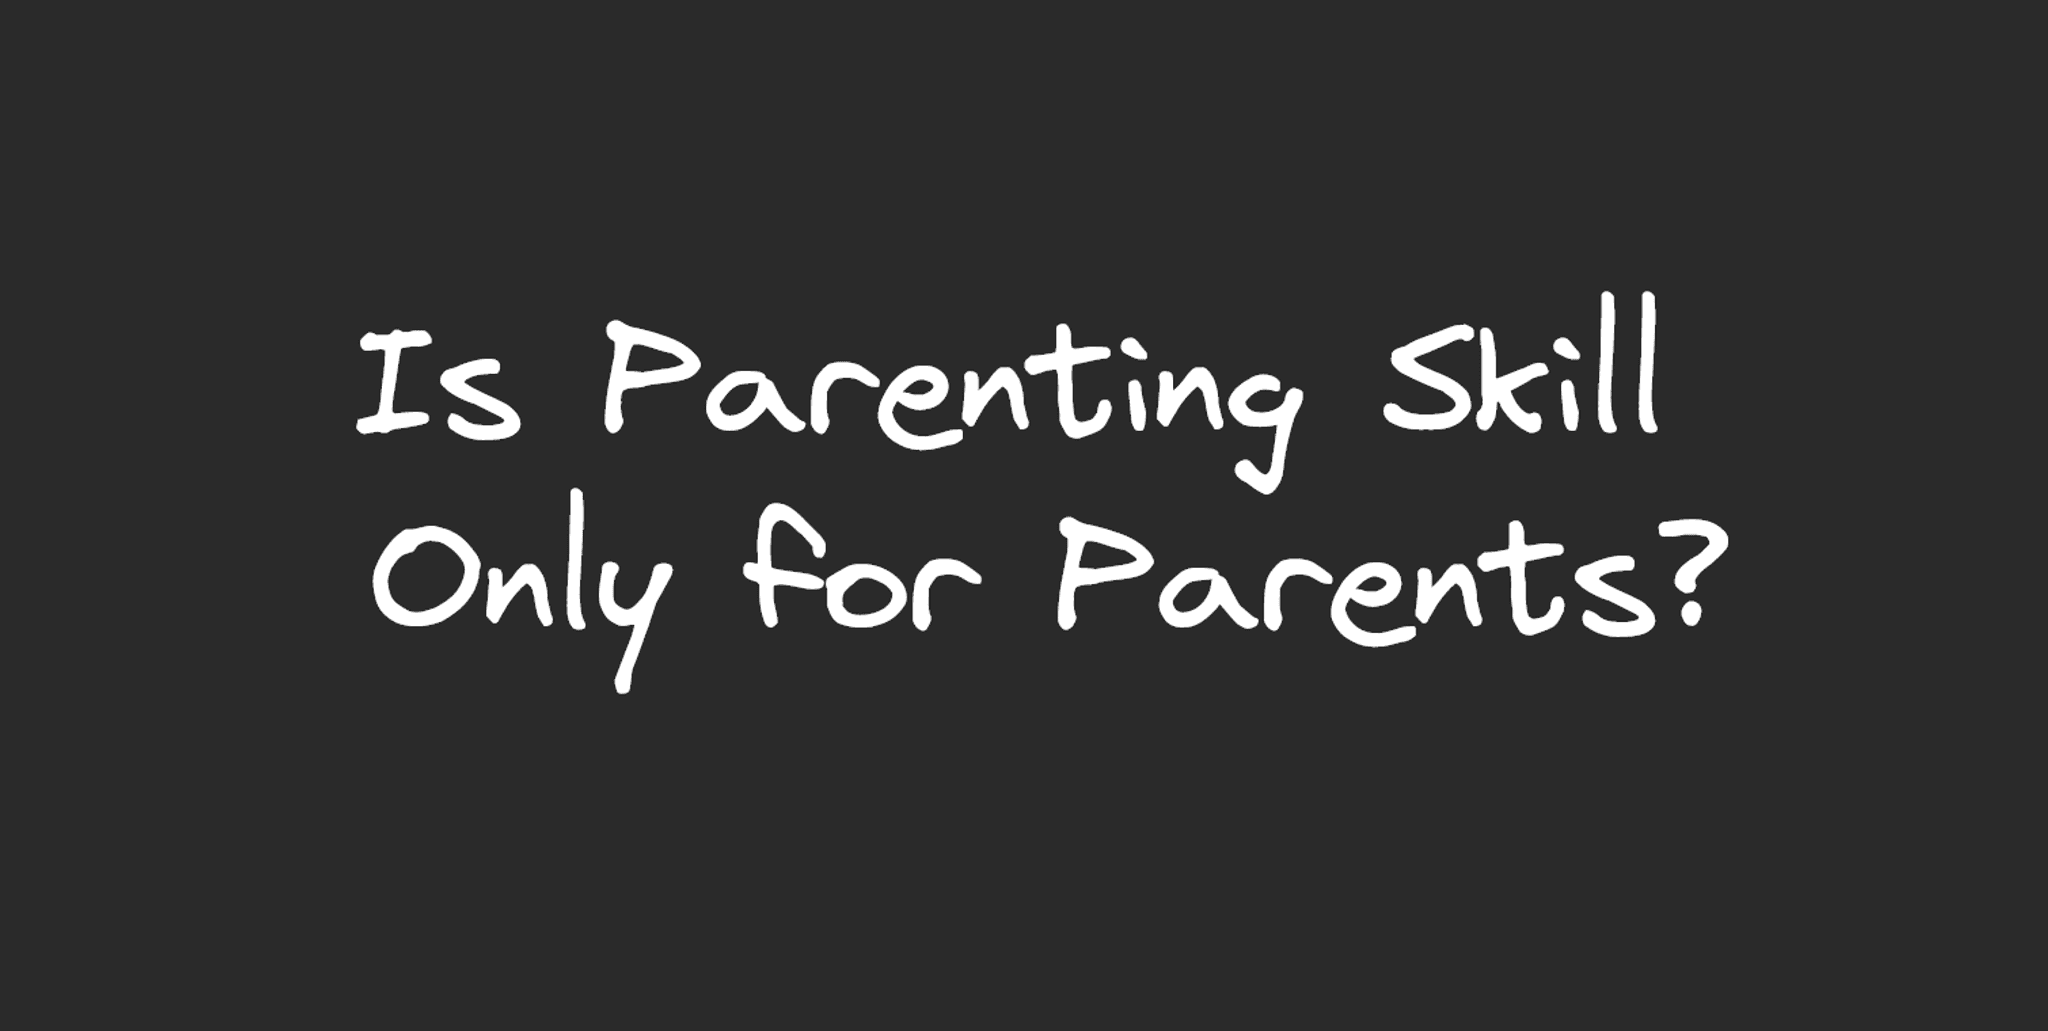 An image containing the text, "Is Parenting Skill Only for Parents?".